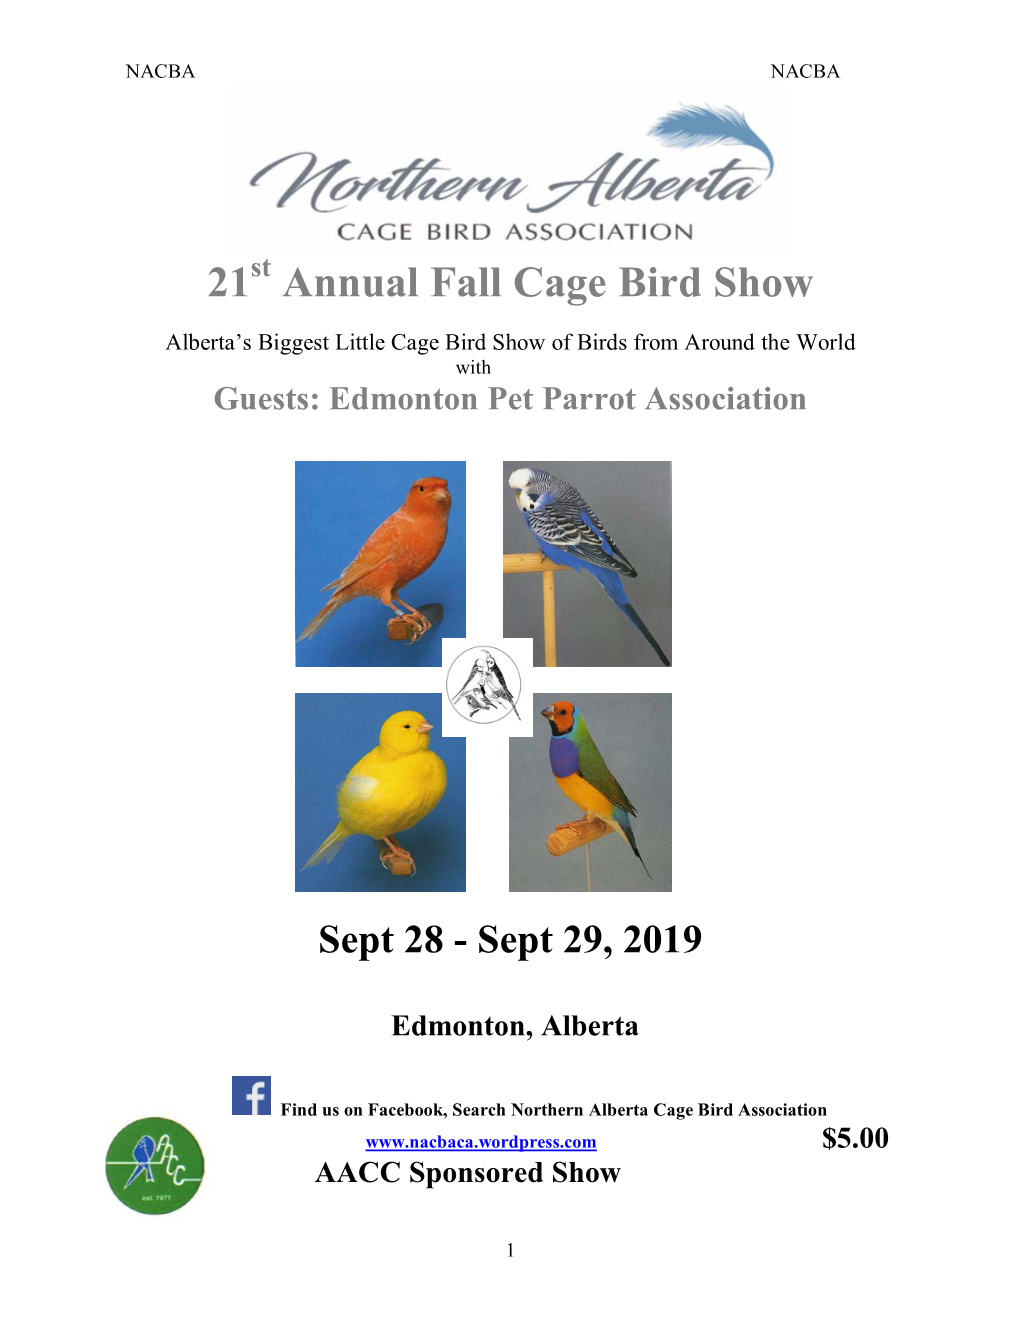 Northern Alberta Cage Bird Society Would Like to Thank All Those That Helped Make the Show the Event of the Season for All Bird Fanciers